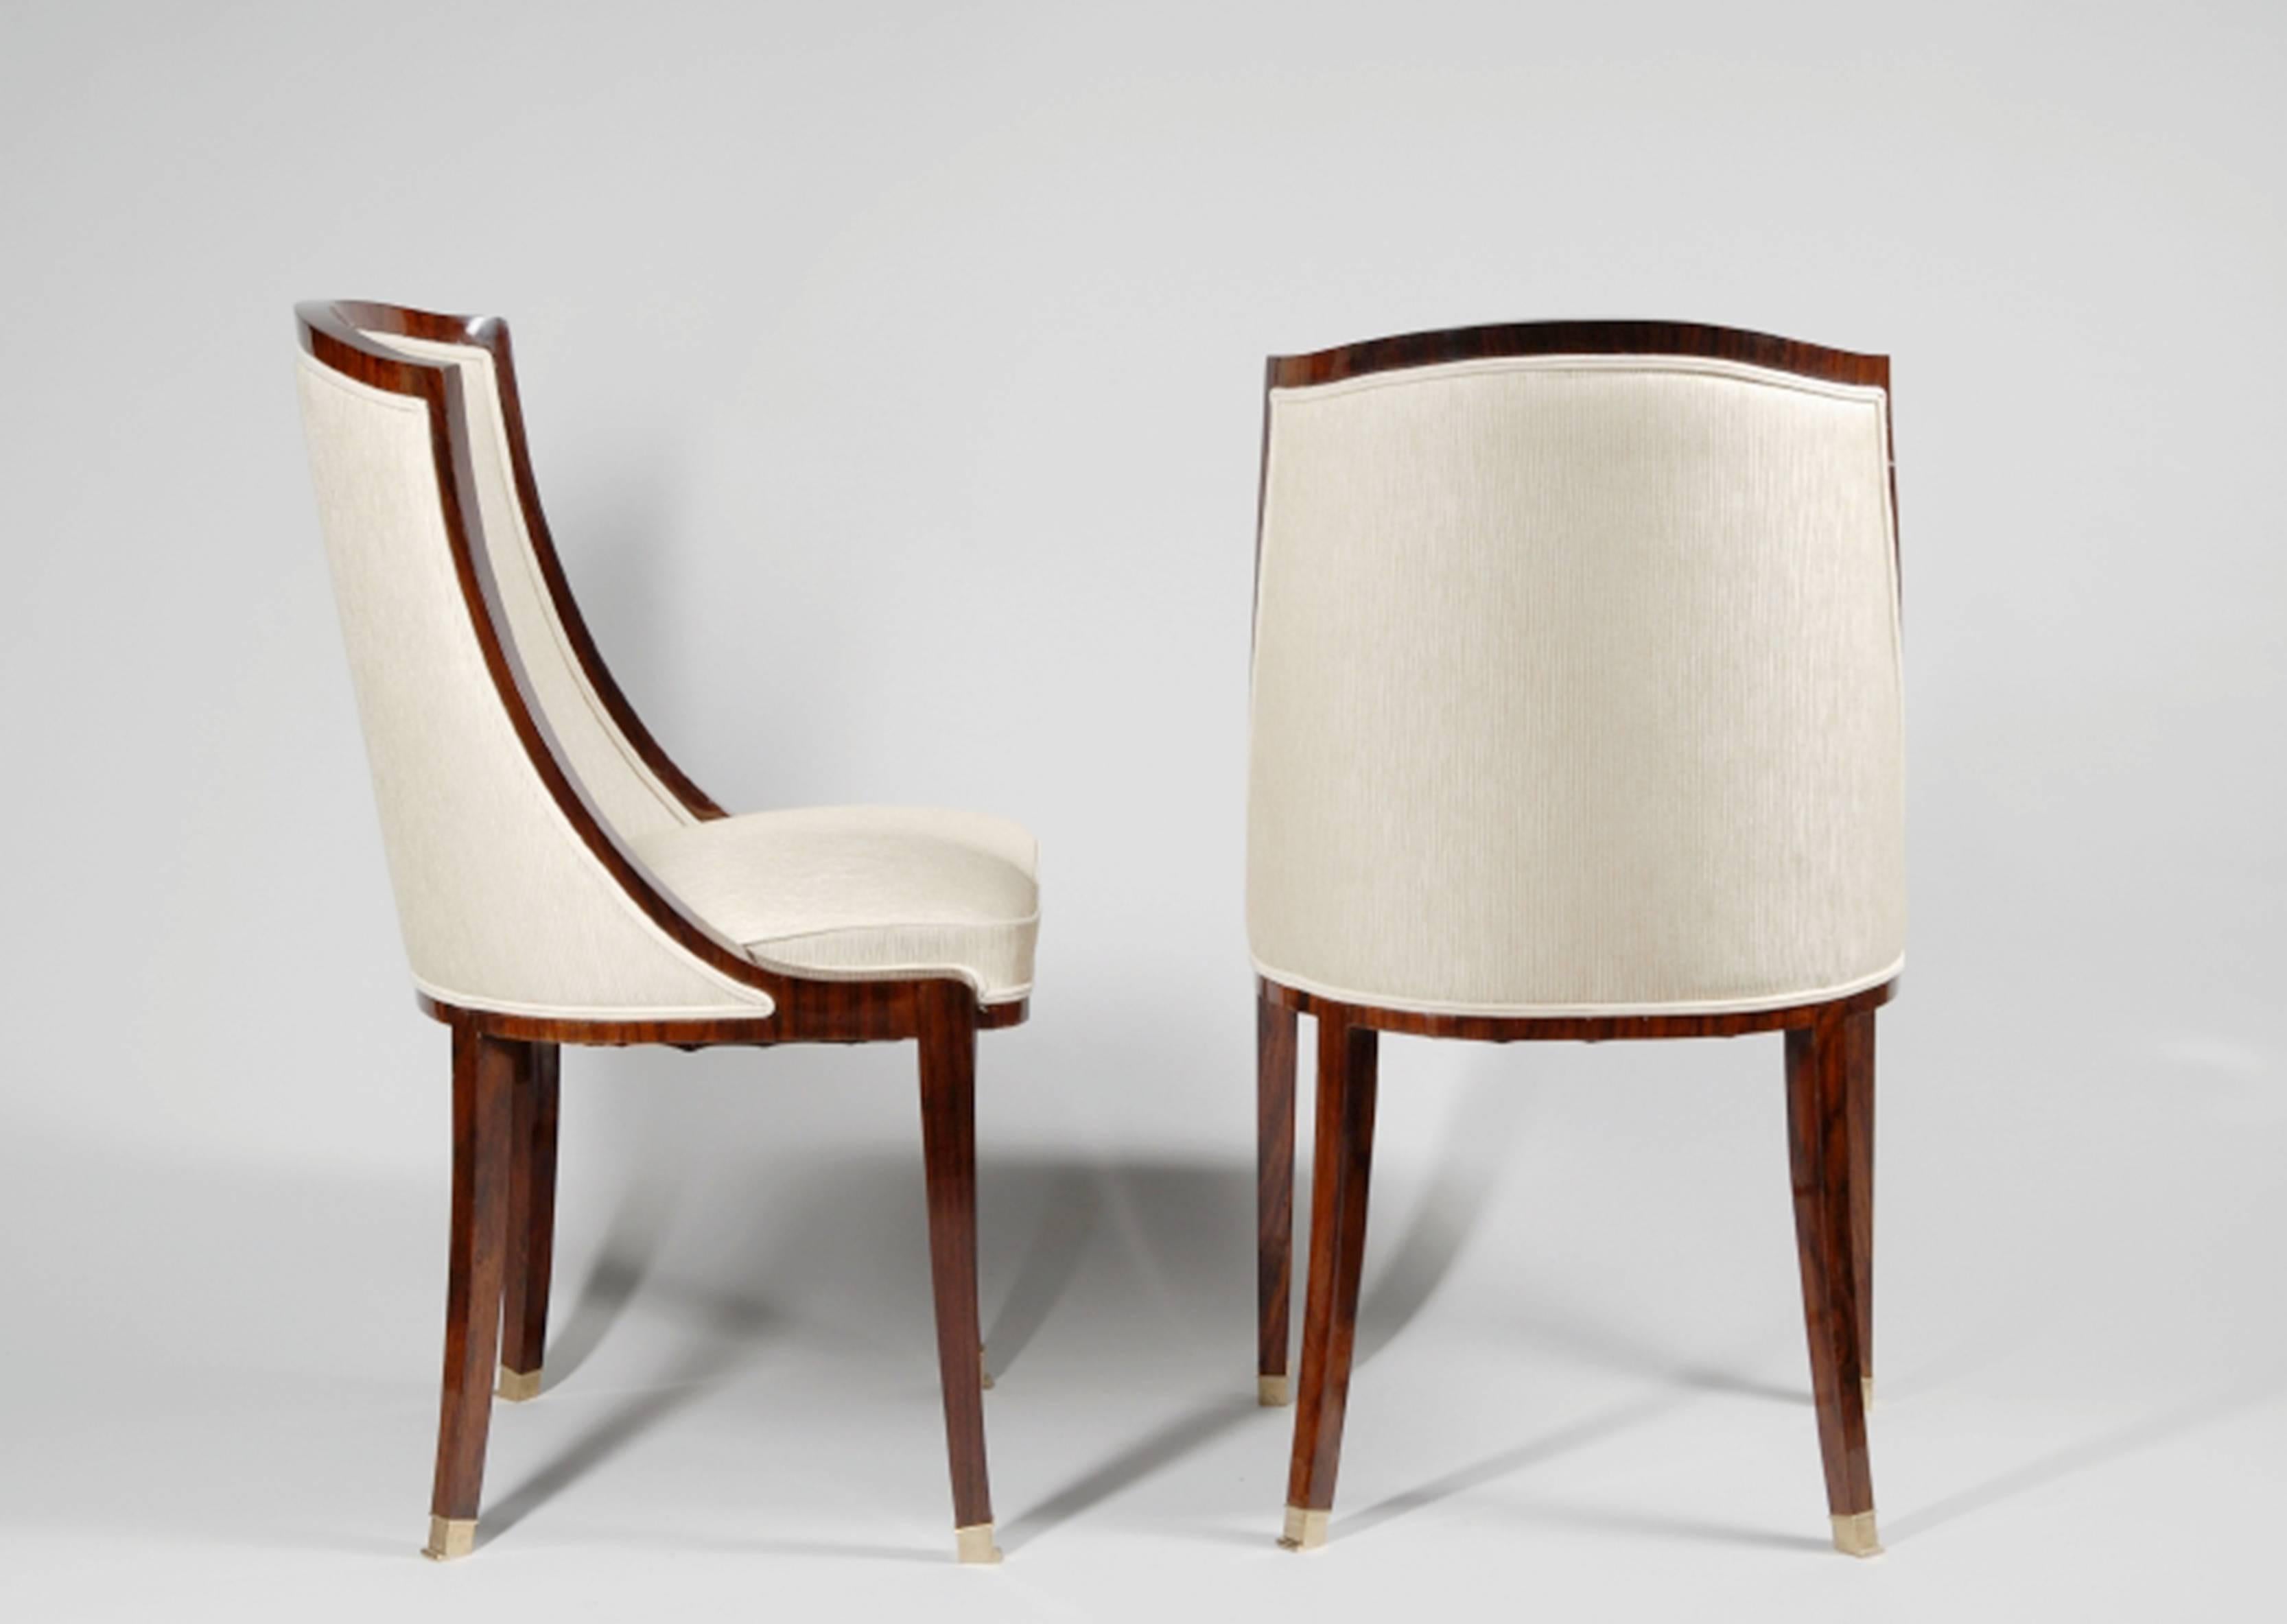 A set of four Art Deco side chairs with rosewood veneer and brass sabots, France, circa 1930.